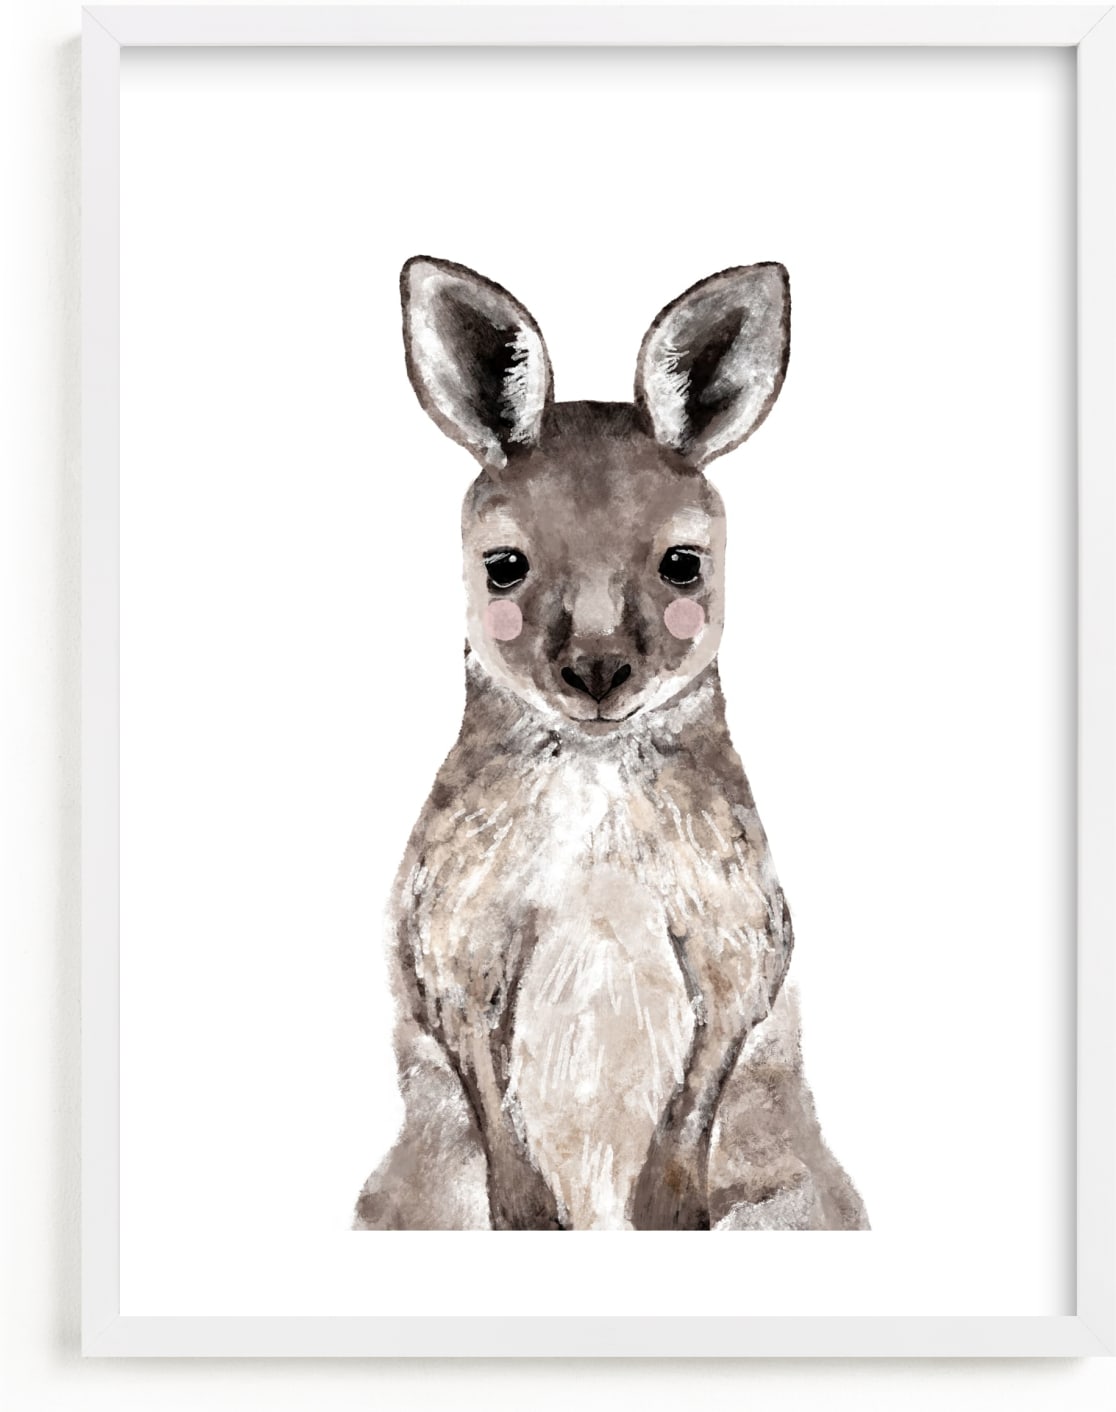 This is a brown art by Cass Loh called Baby Kangaroo.